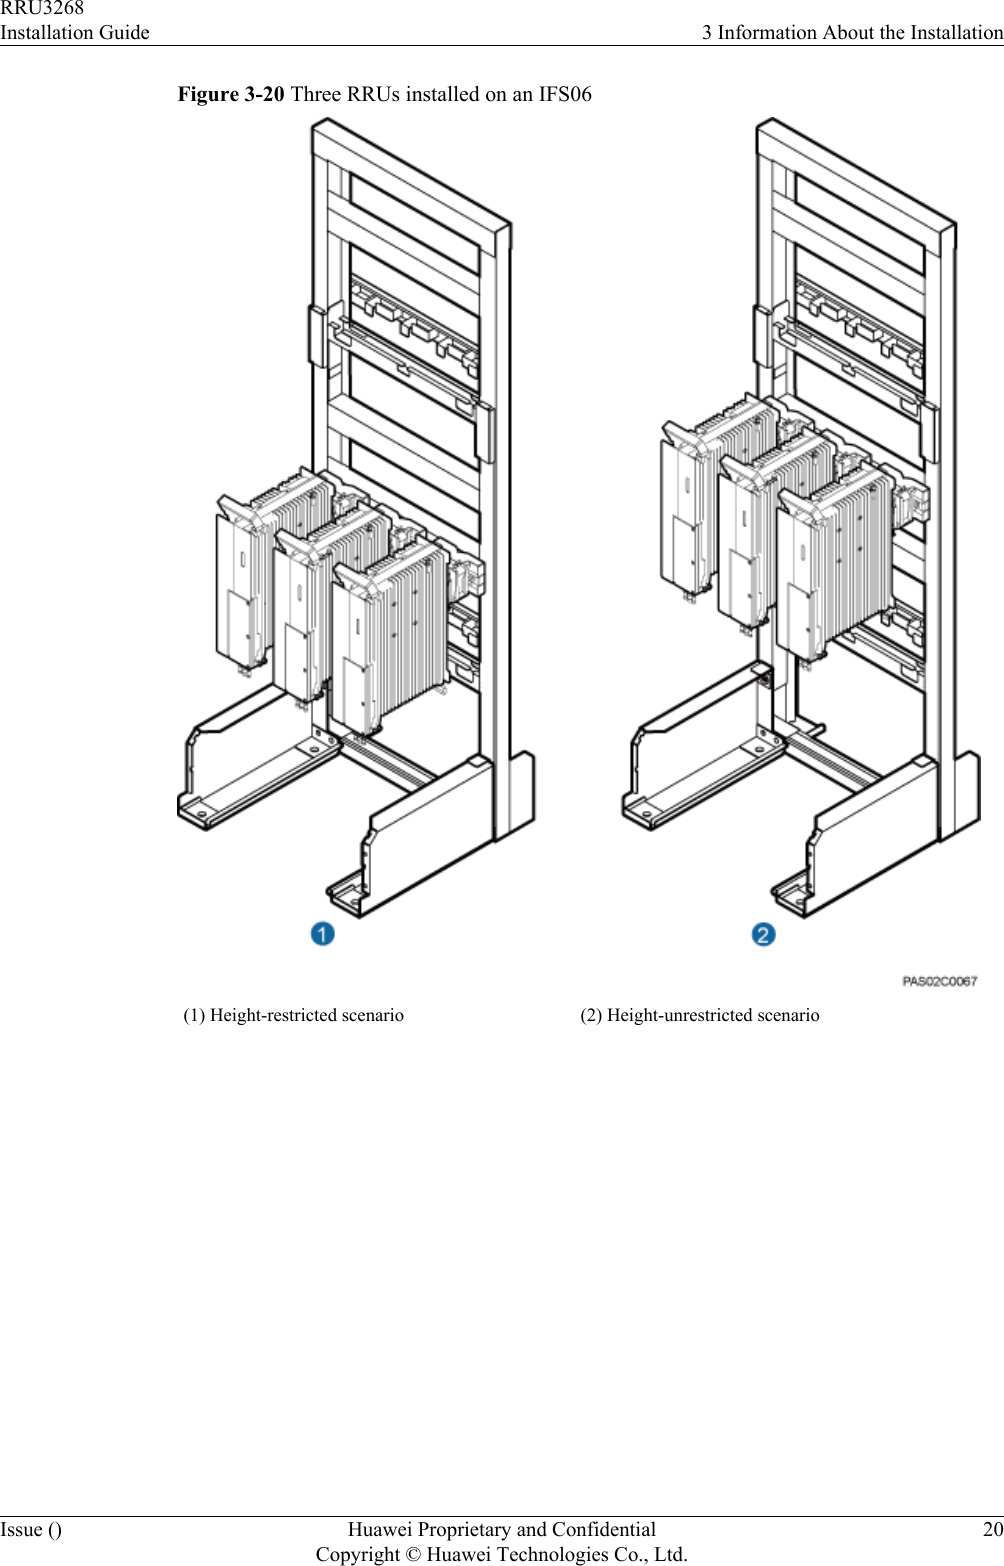 Figure 3-20 Three RRUs installed on an IFS06(1) Height-restricted scenario (2) Height-unrestricted scenario RRU3268Installation Guide 3 Information About the InstallationIssue () Huawei Proprietary and ConfidentialCopyright © Huawei Technologies Co., Ltd.20